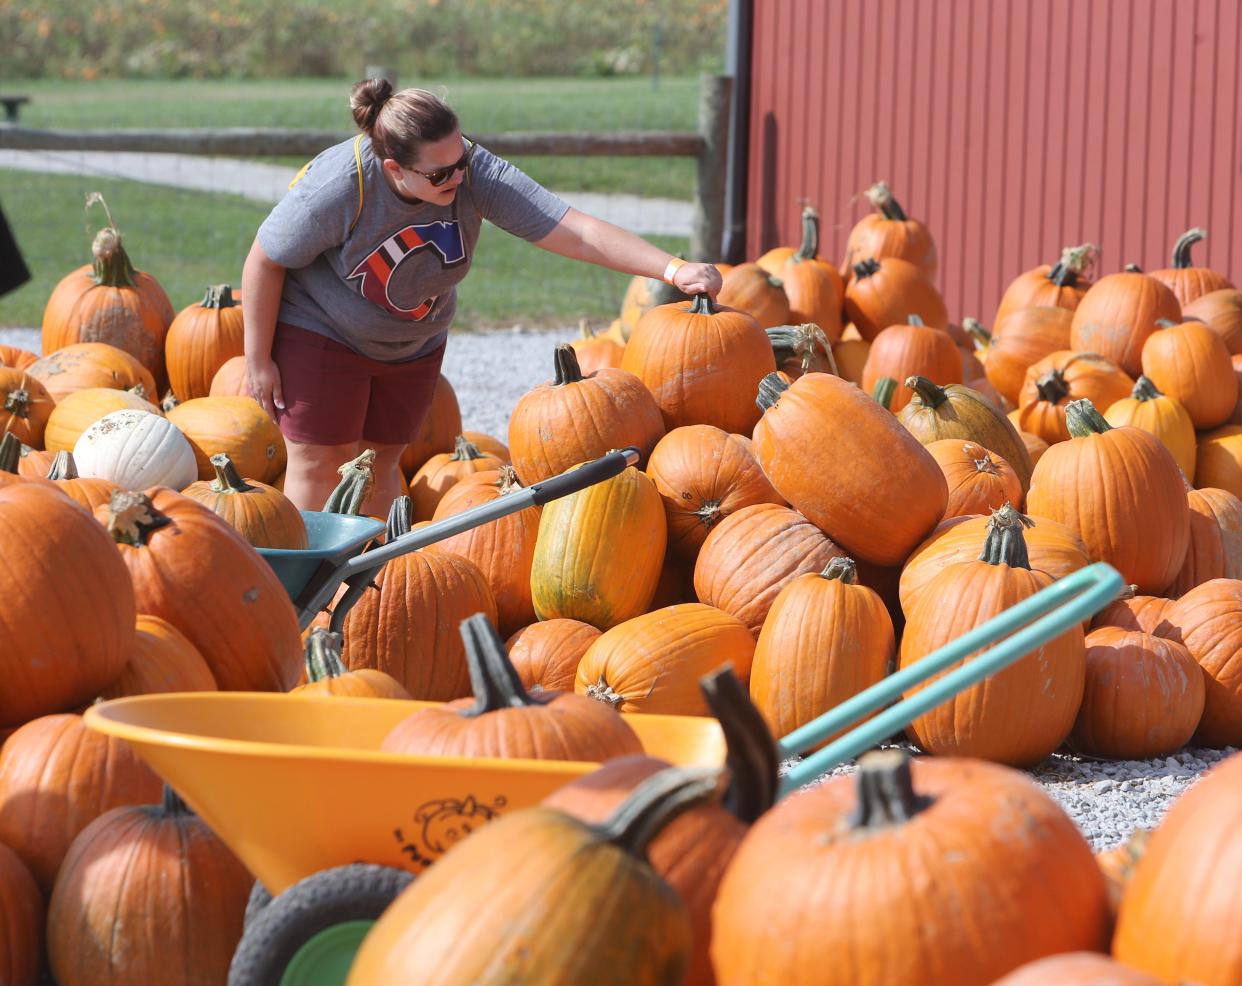 Nikki Farrell picks out a pumpkin at Nickajack Farms in Lawrence Township on Monday, Oct. 11, 2021.